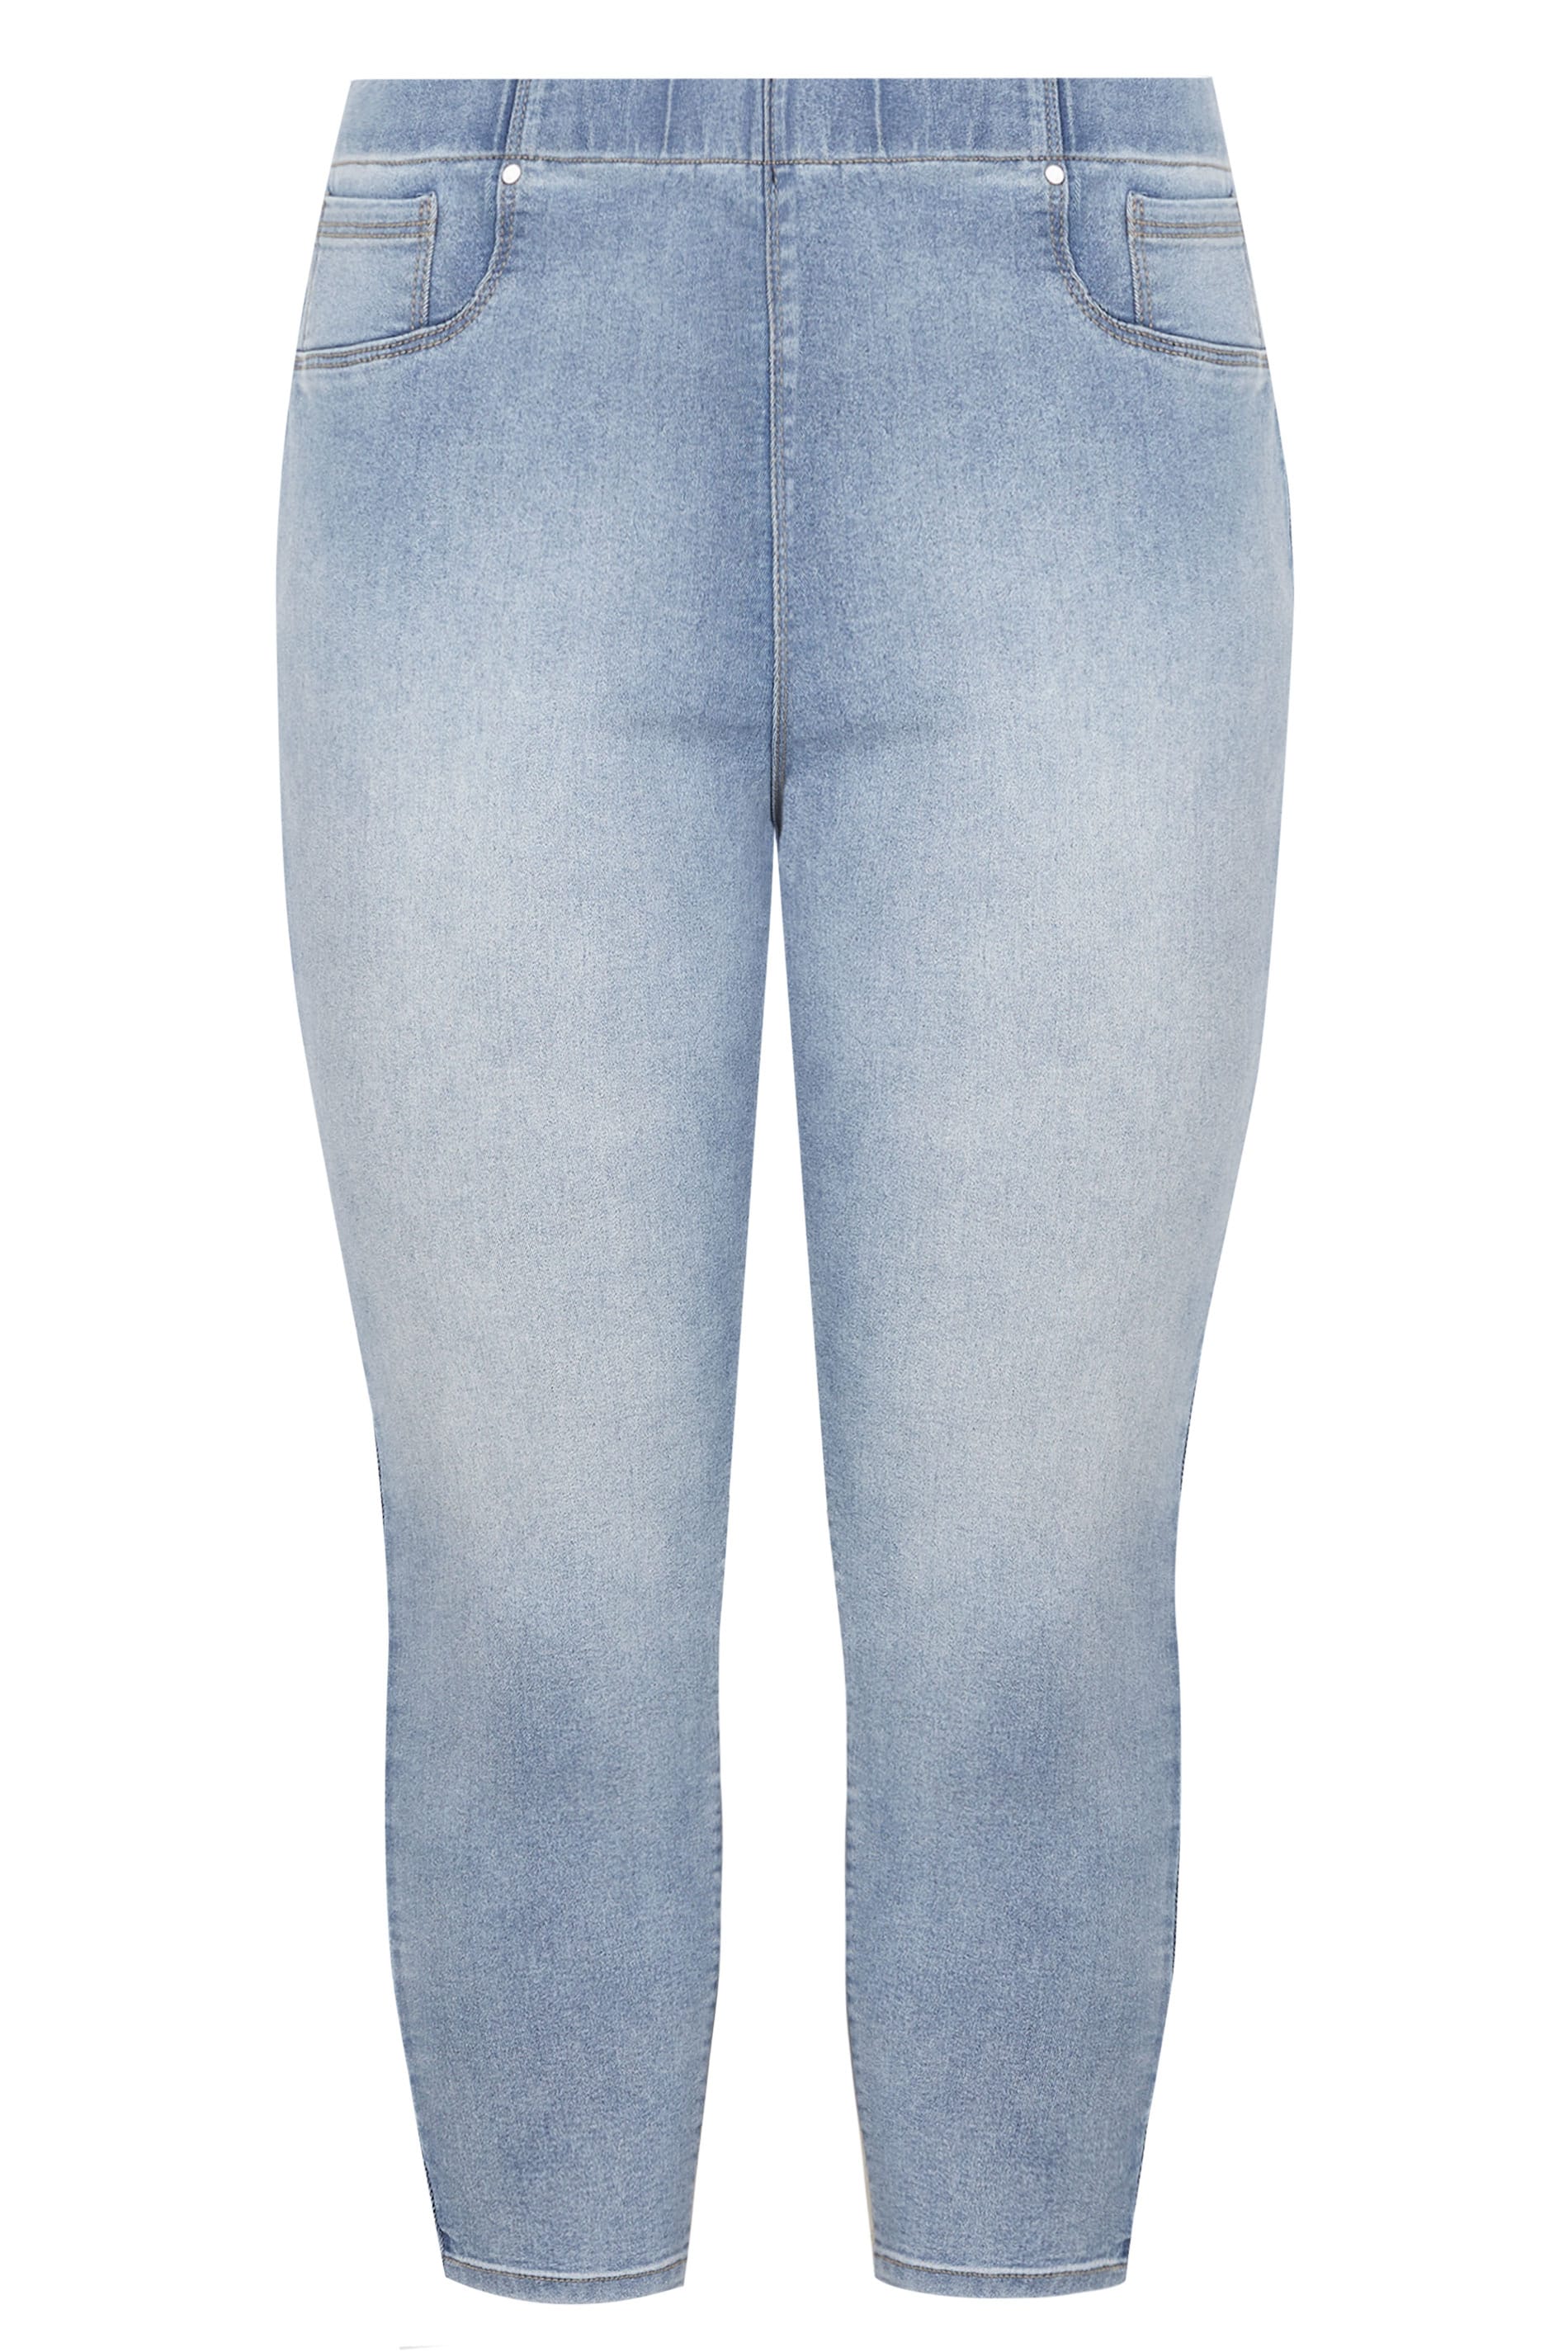 Bleach Blue Cropped JENNY Jeggings | Plus Sizes 16 to 36 | Yours Clothing